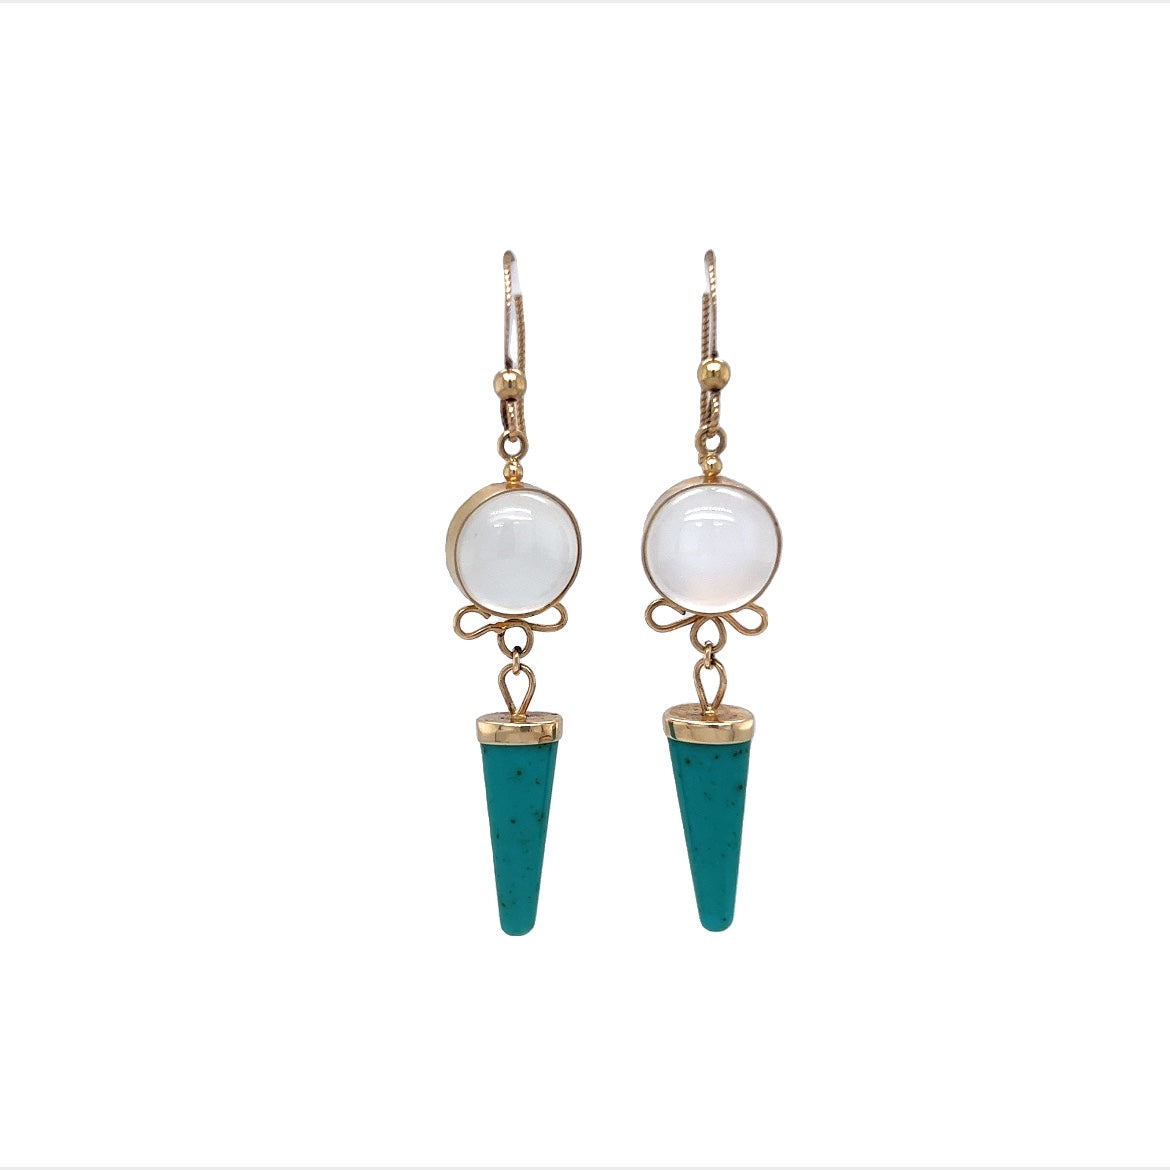 Amazonite and Chalcedony Earrings in 14k Yellow Gold